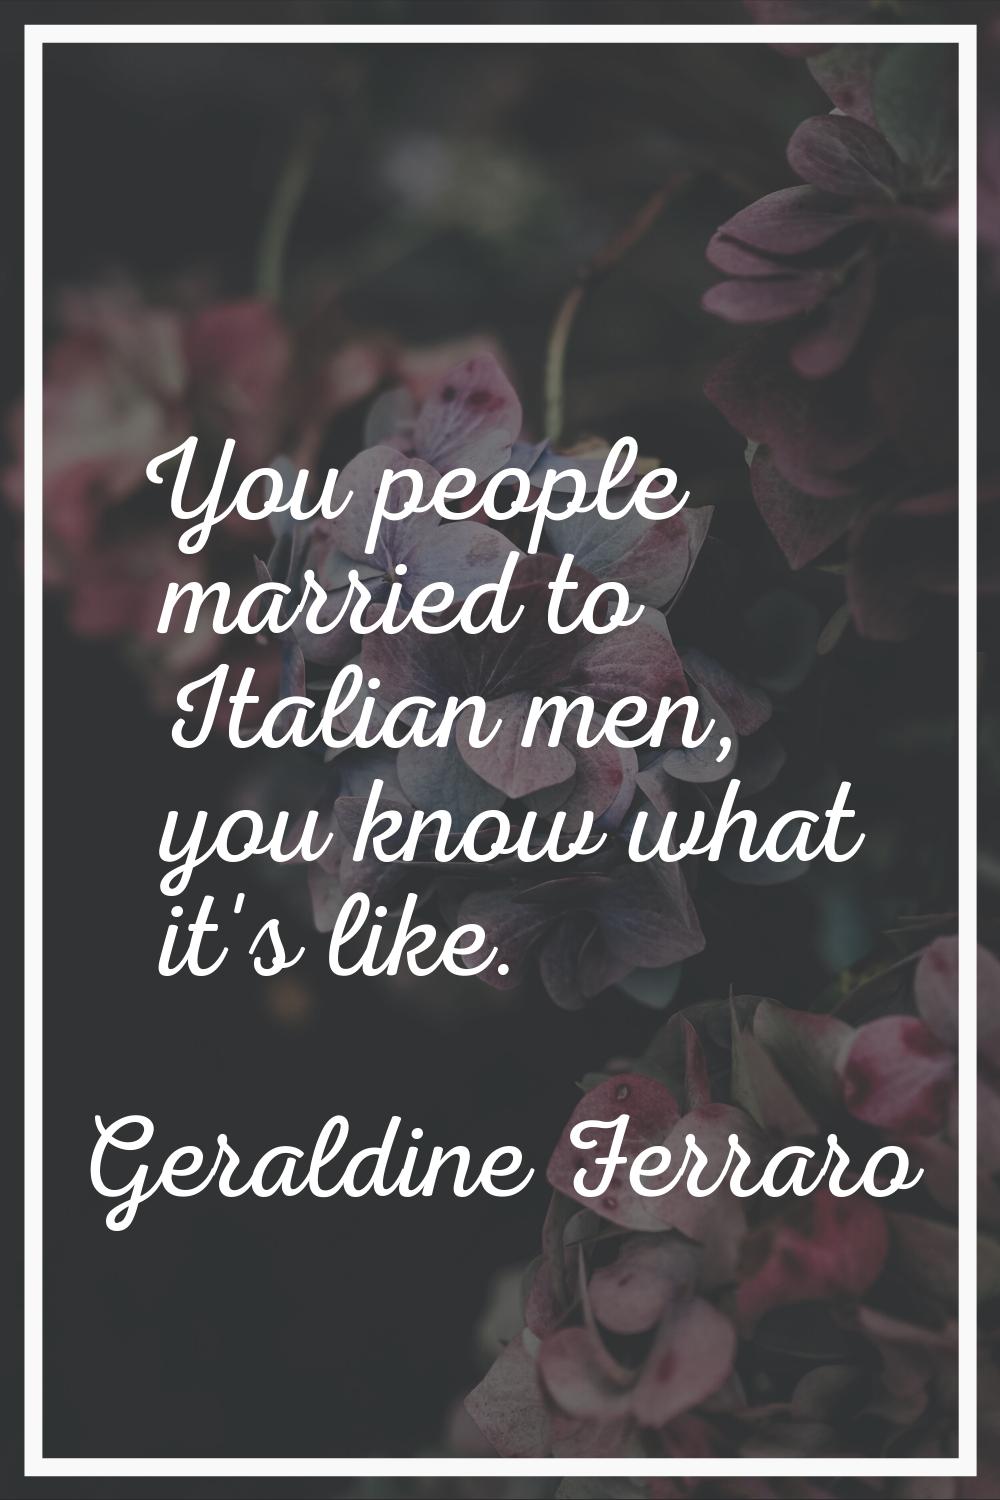 You people married to Italian men, you know what it's like.